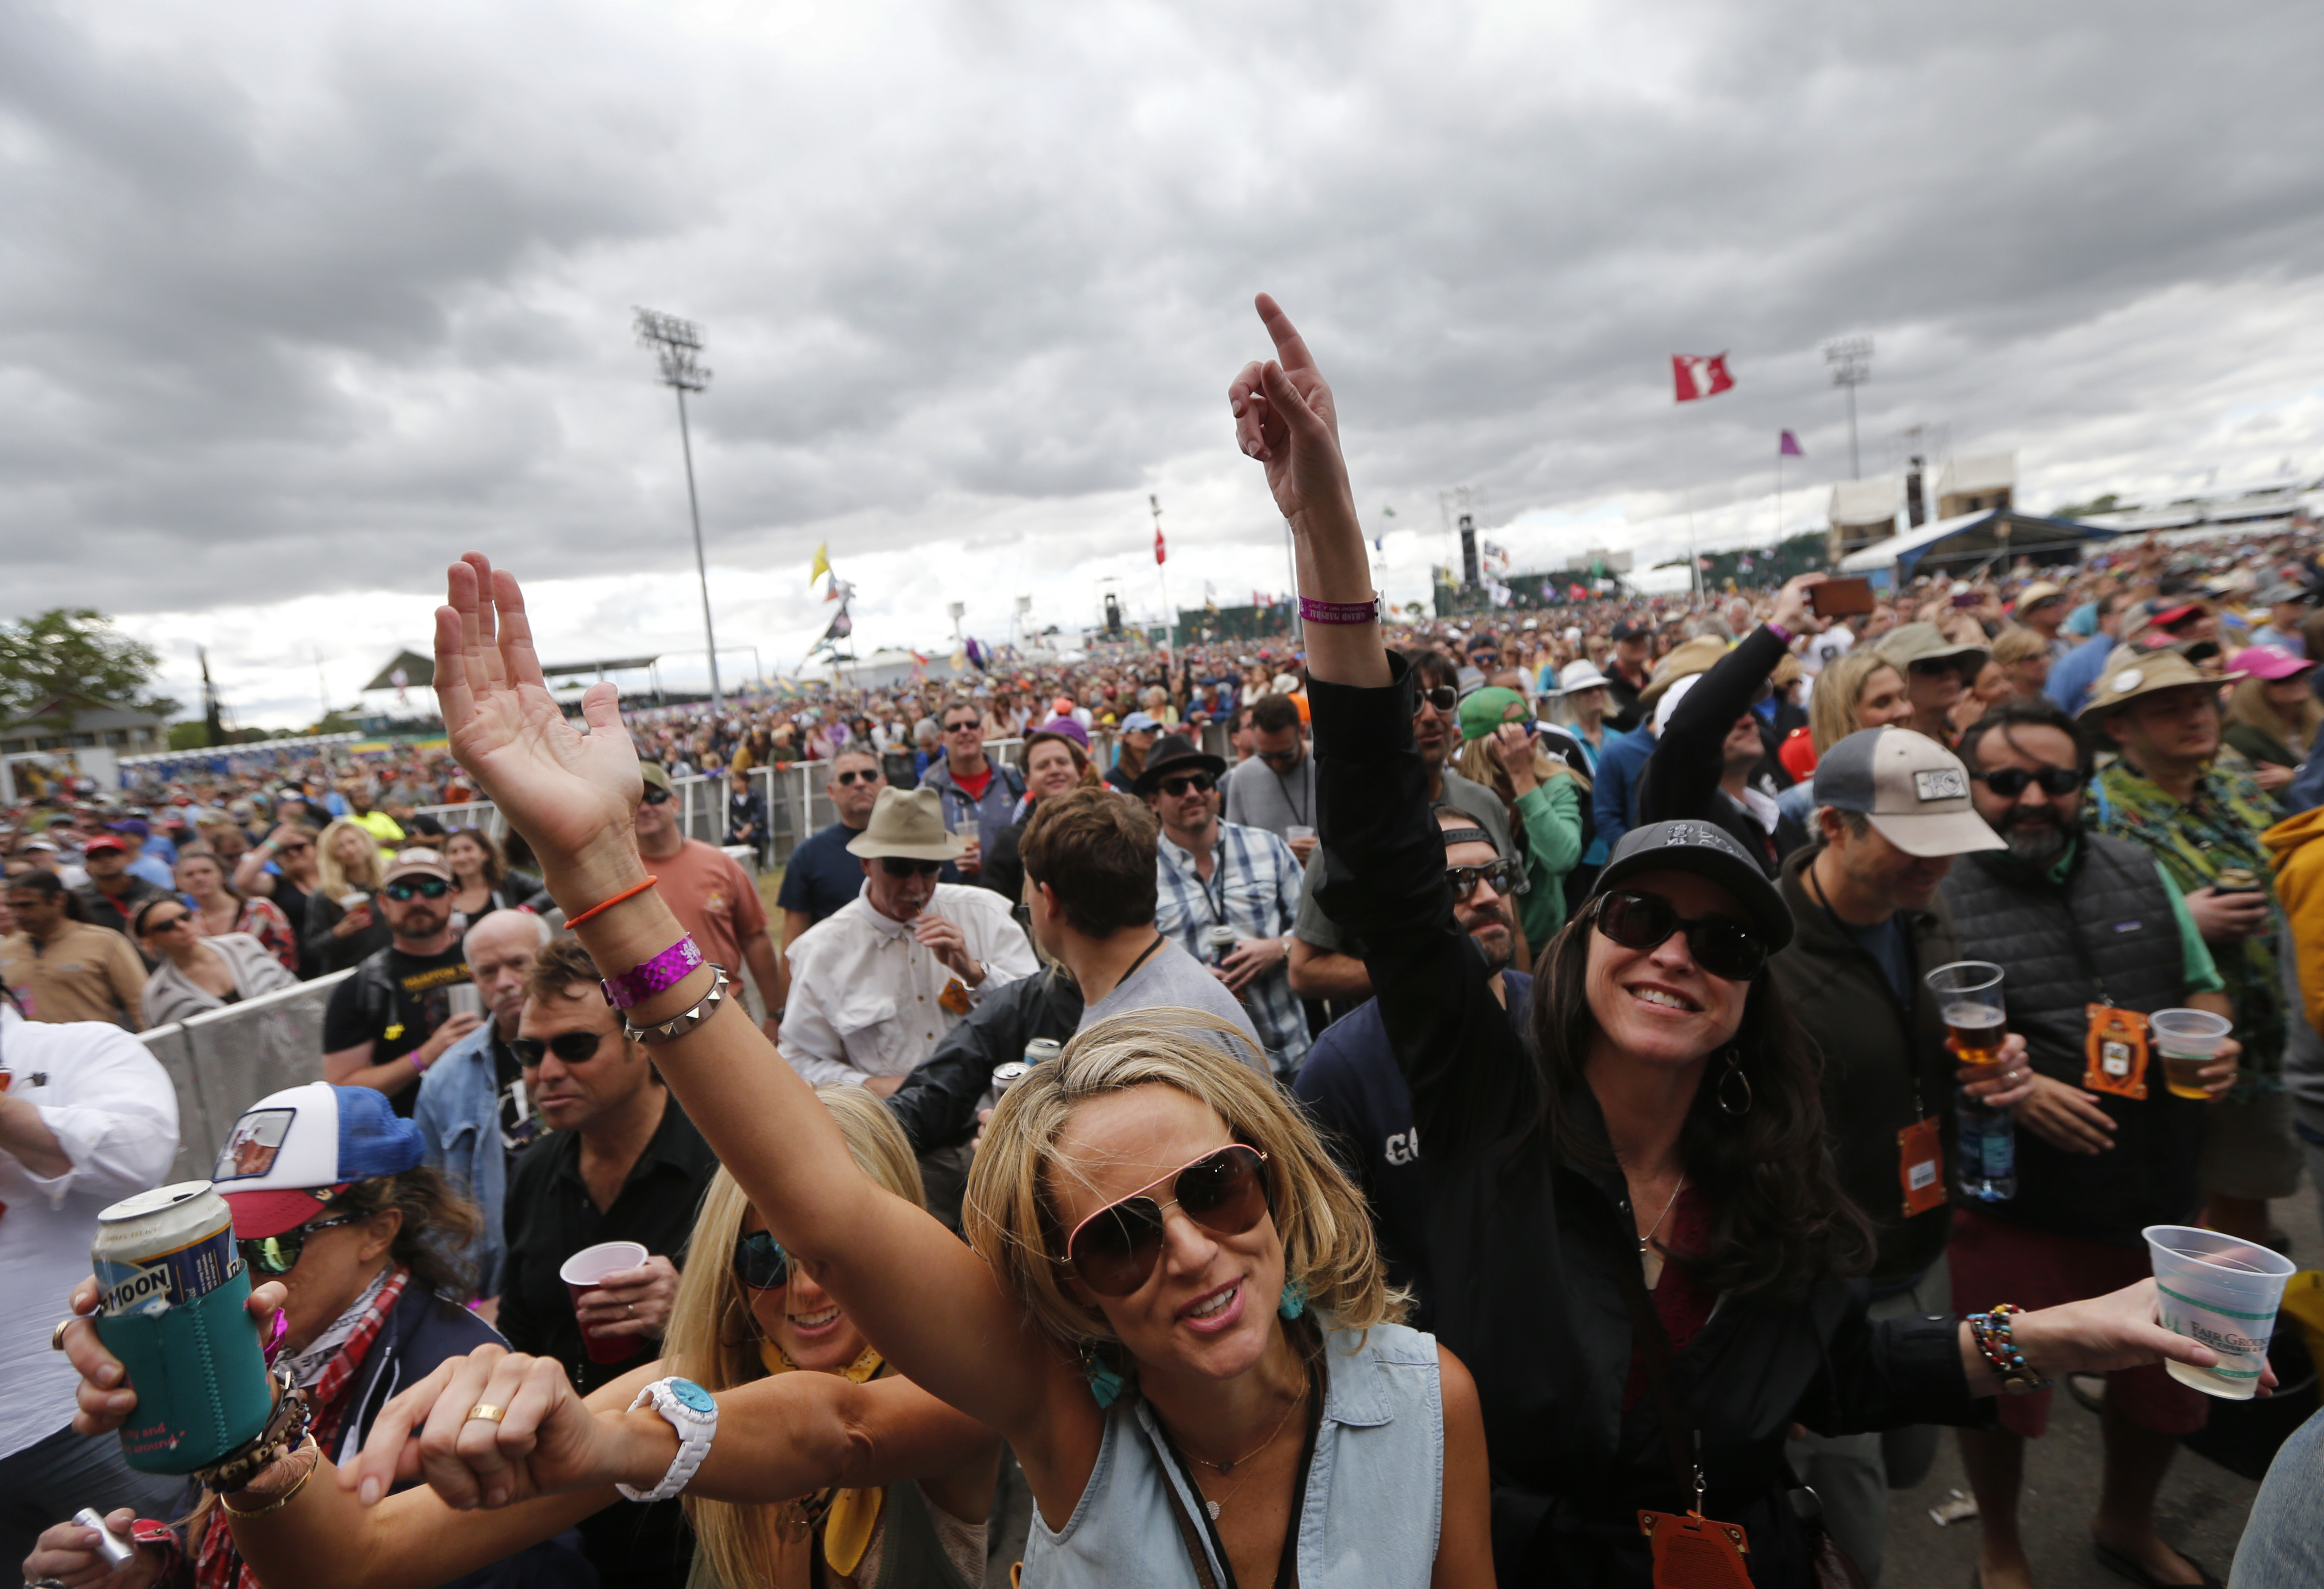 Fans cheer as Widespread Panic performs at the New Orleans Jazz and Heritage Festival in New Orleans, Thursday, May 4, 2017. (AP Photo/Gerald Herbert)